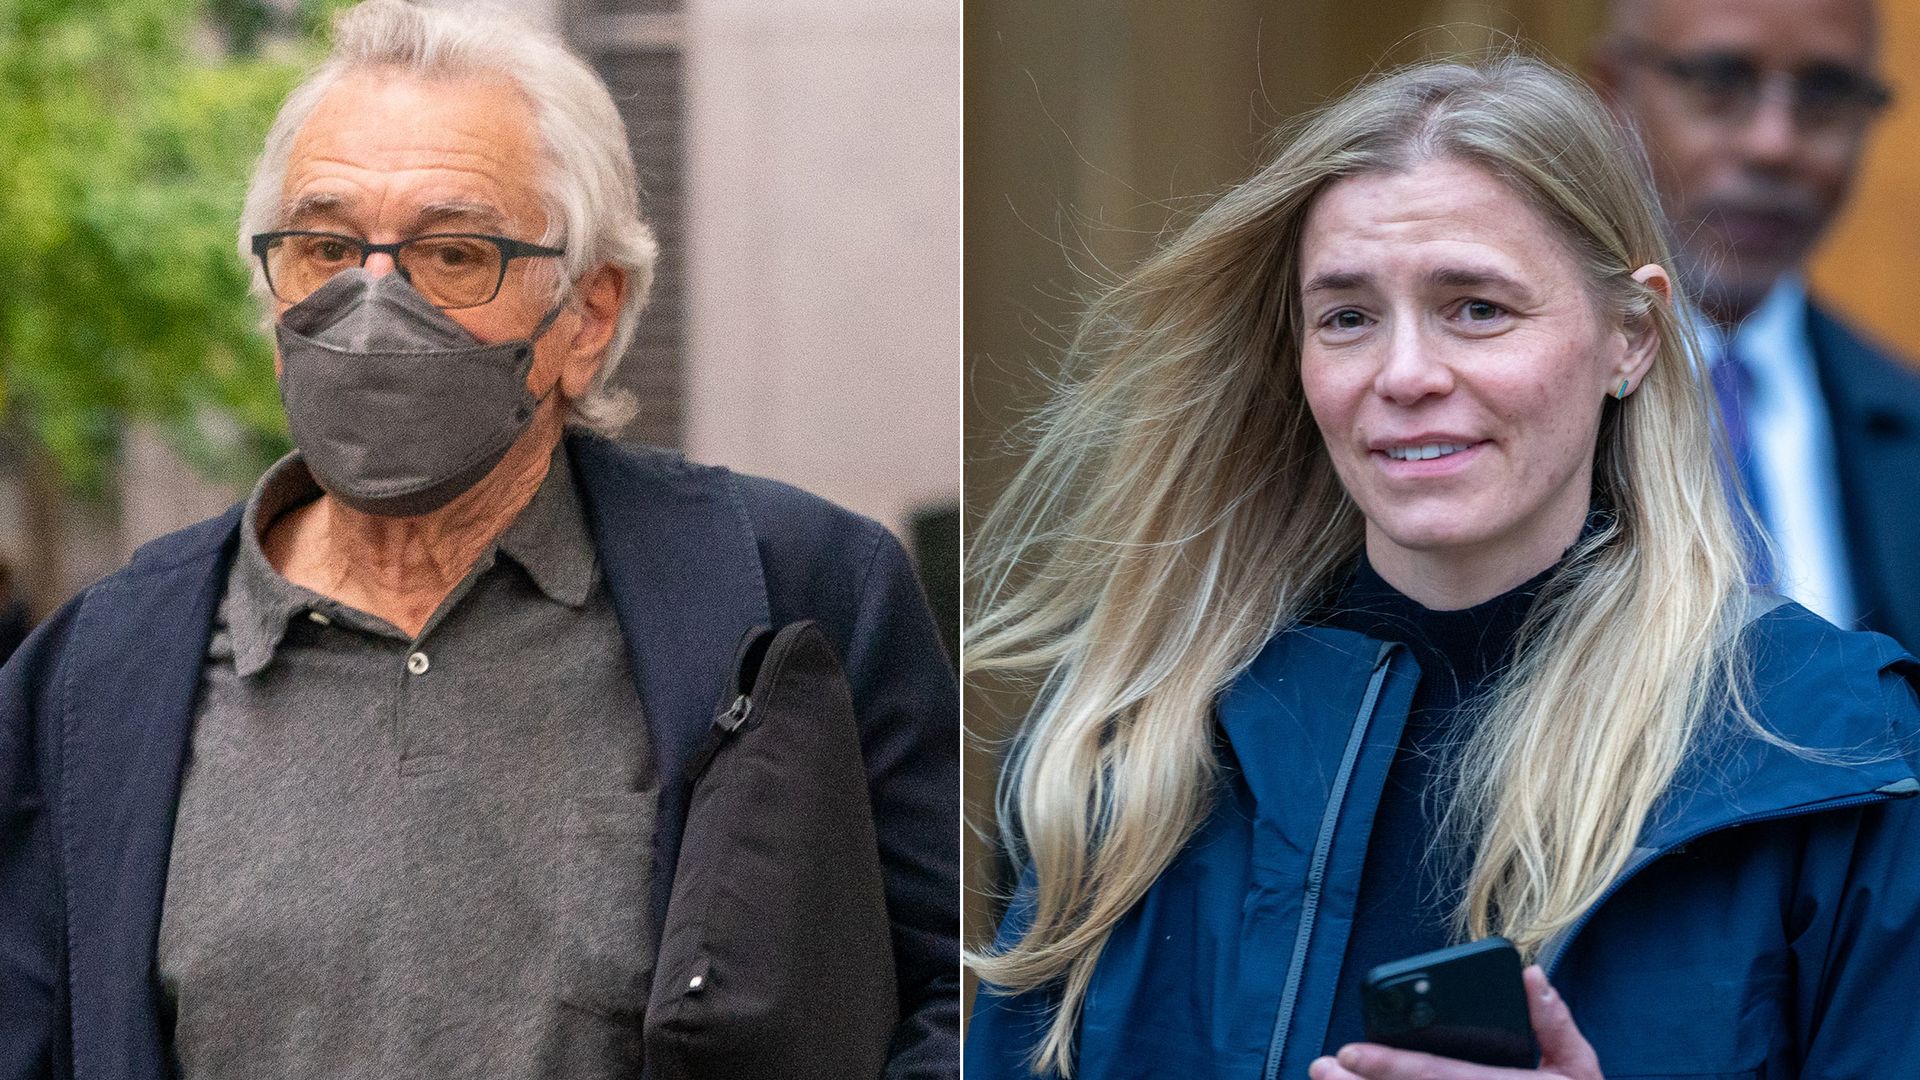 Robert de Niro and his former assistant leaving court